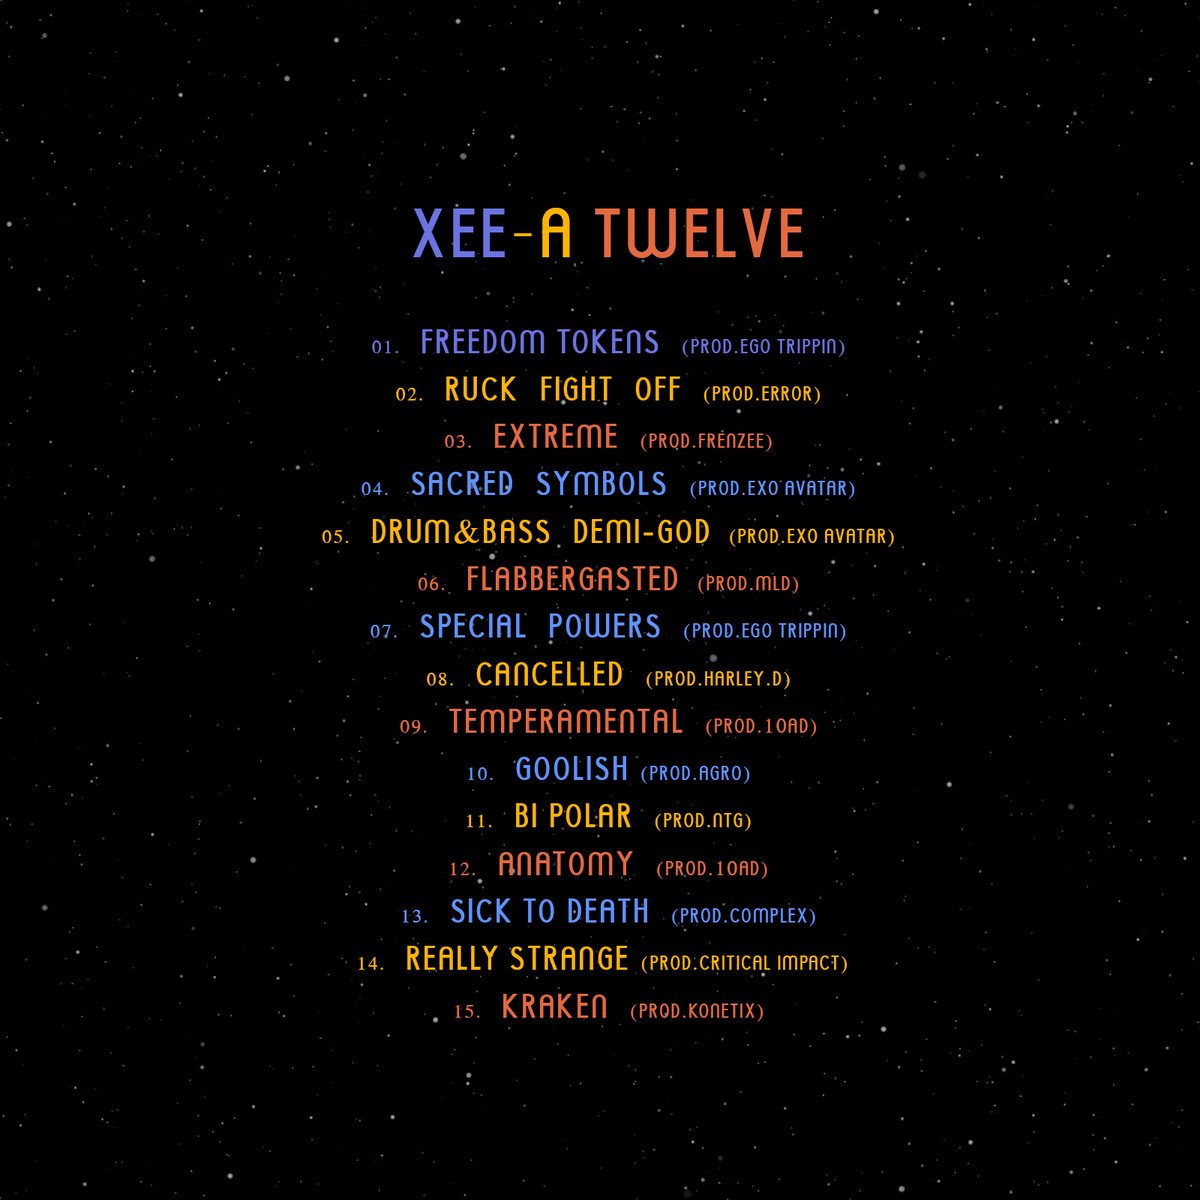 Image of Xee - A Twelve - Physical CD